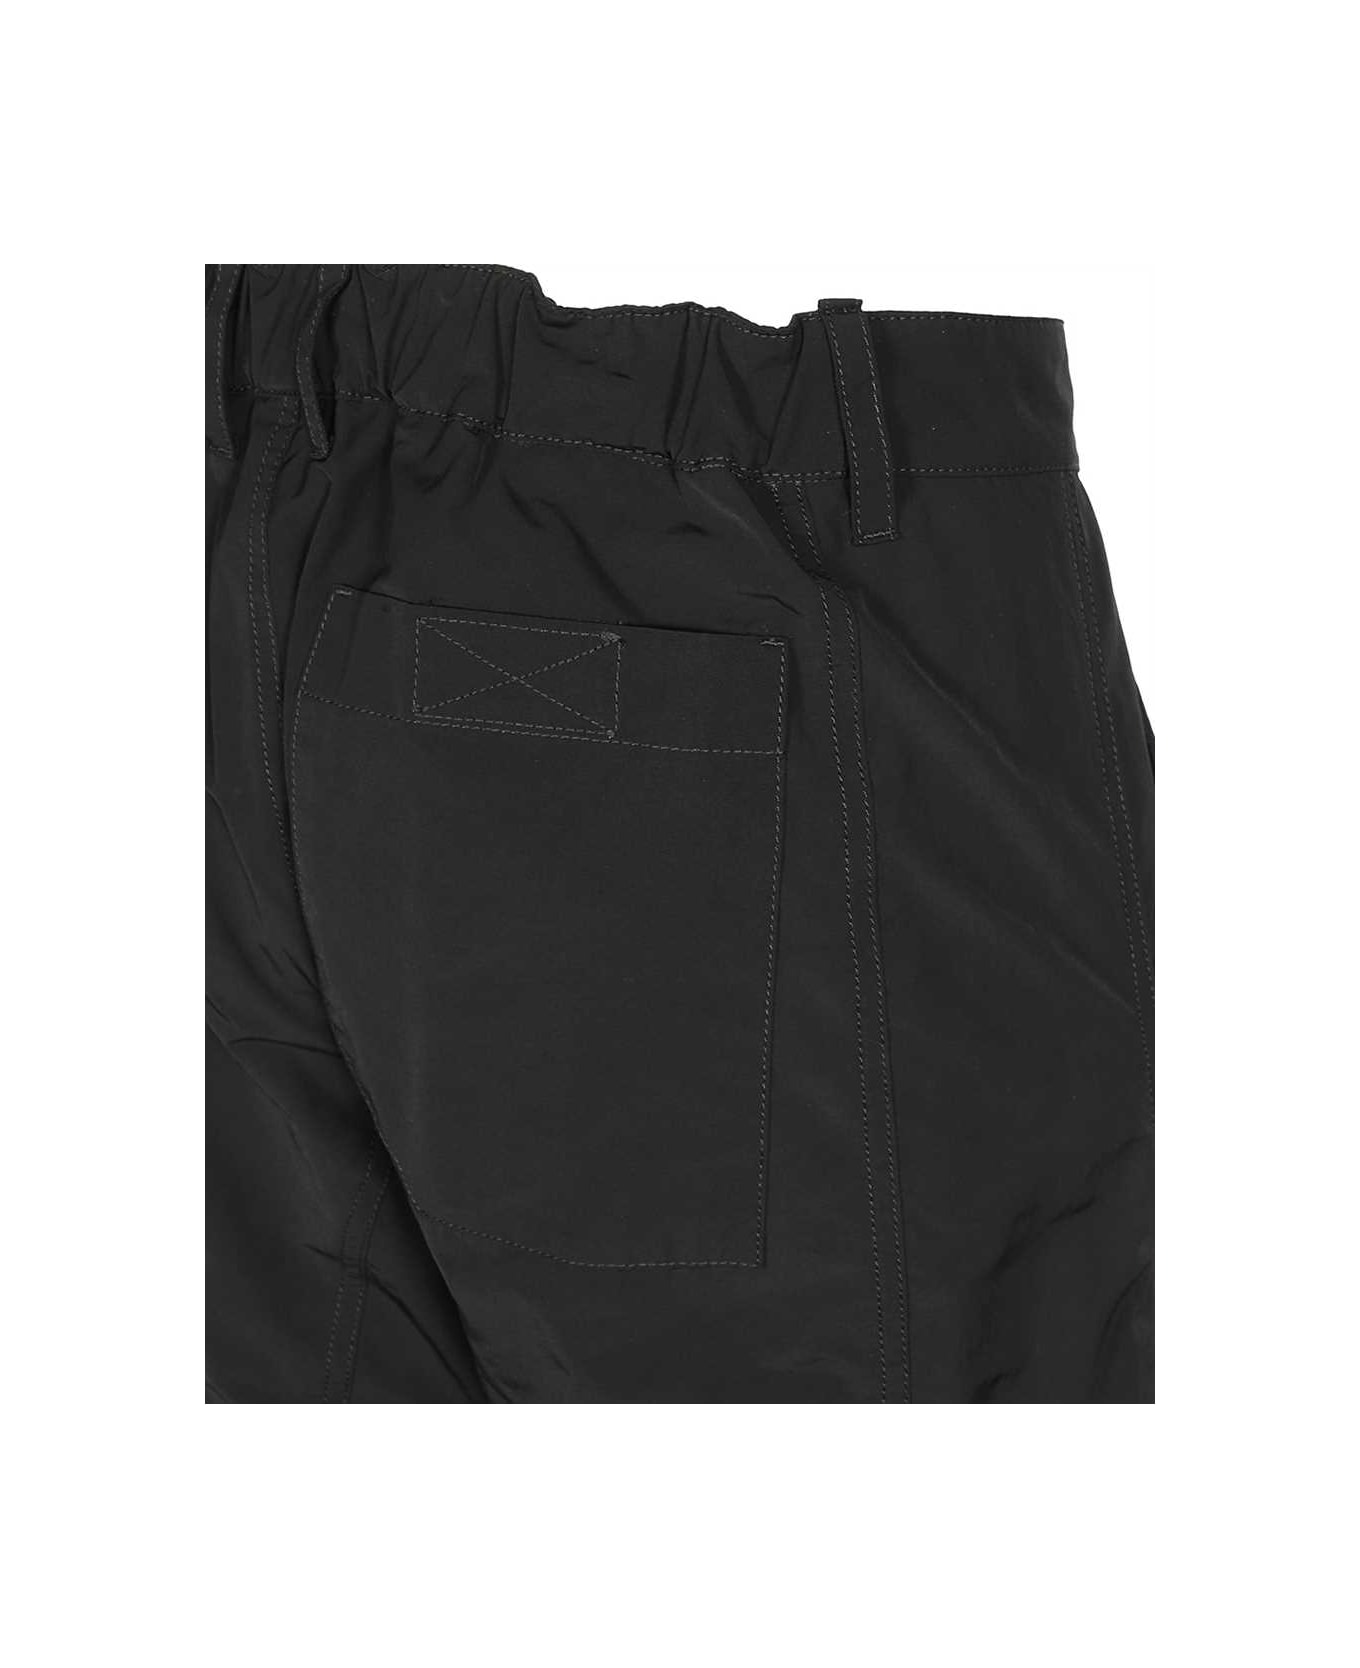 44 Label Group Cargo Trousers - black ボトムス